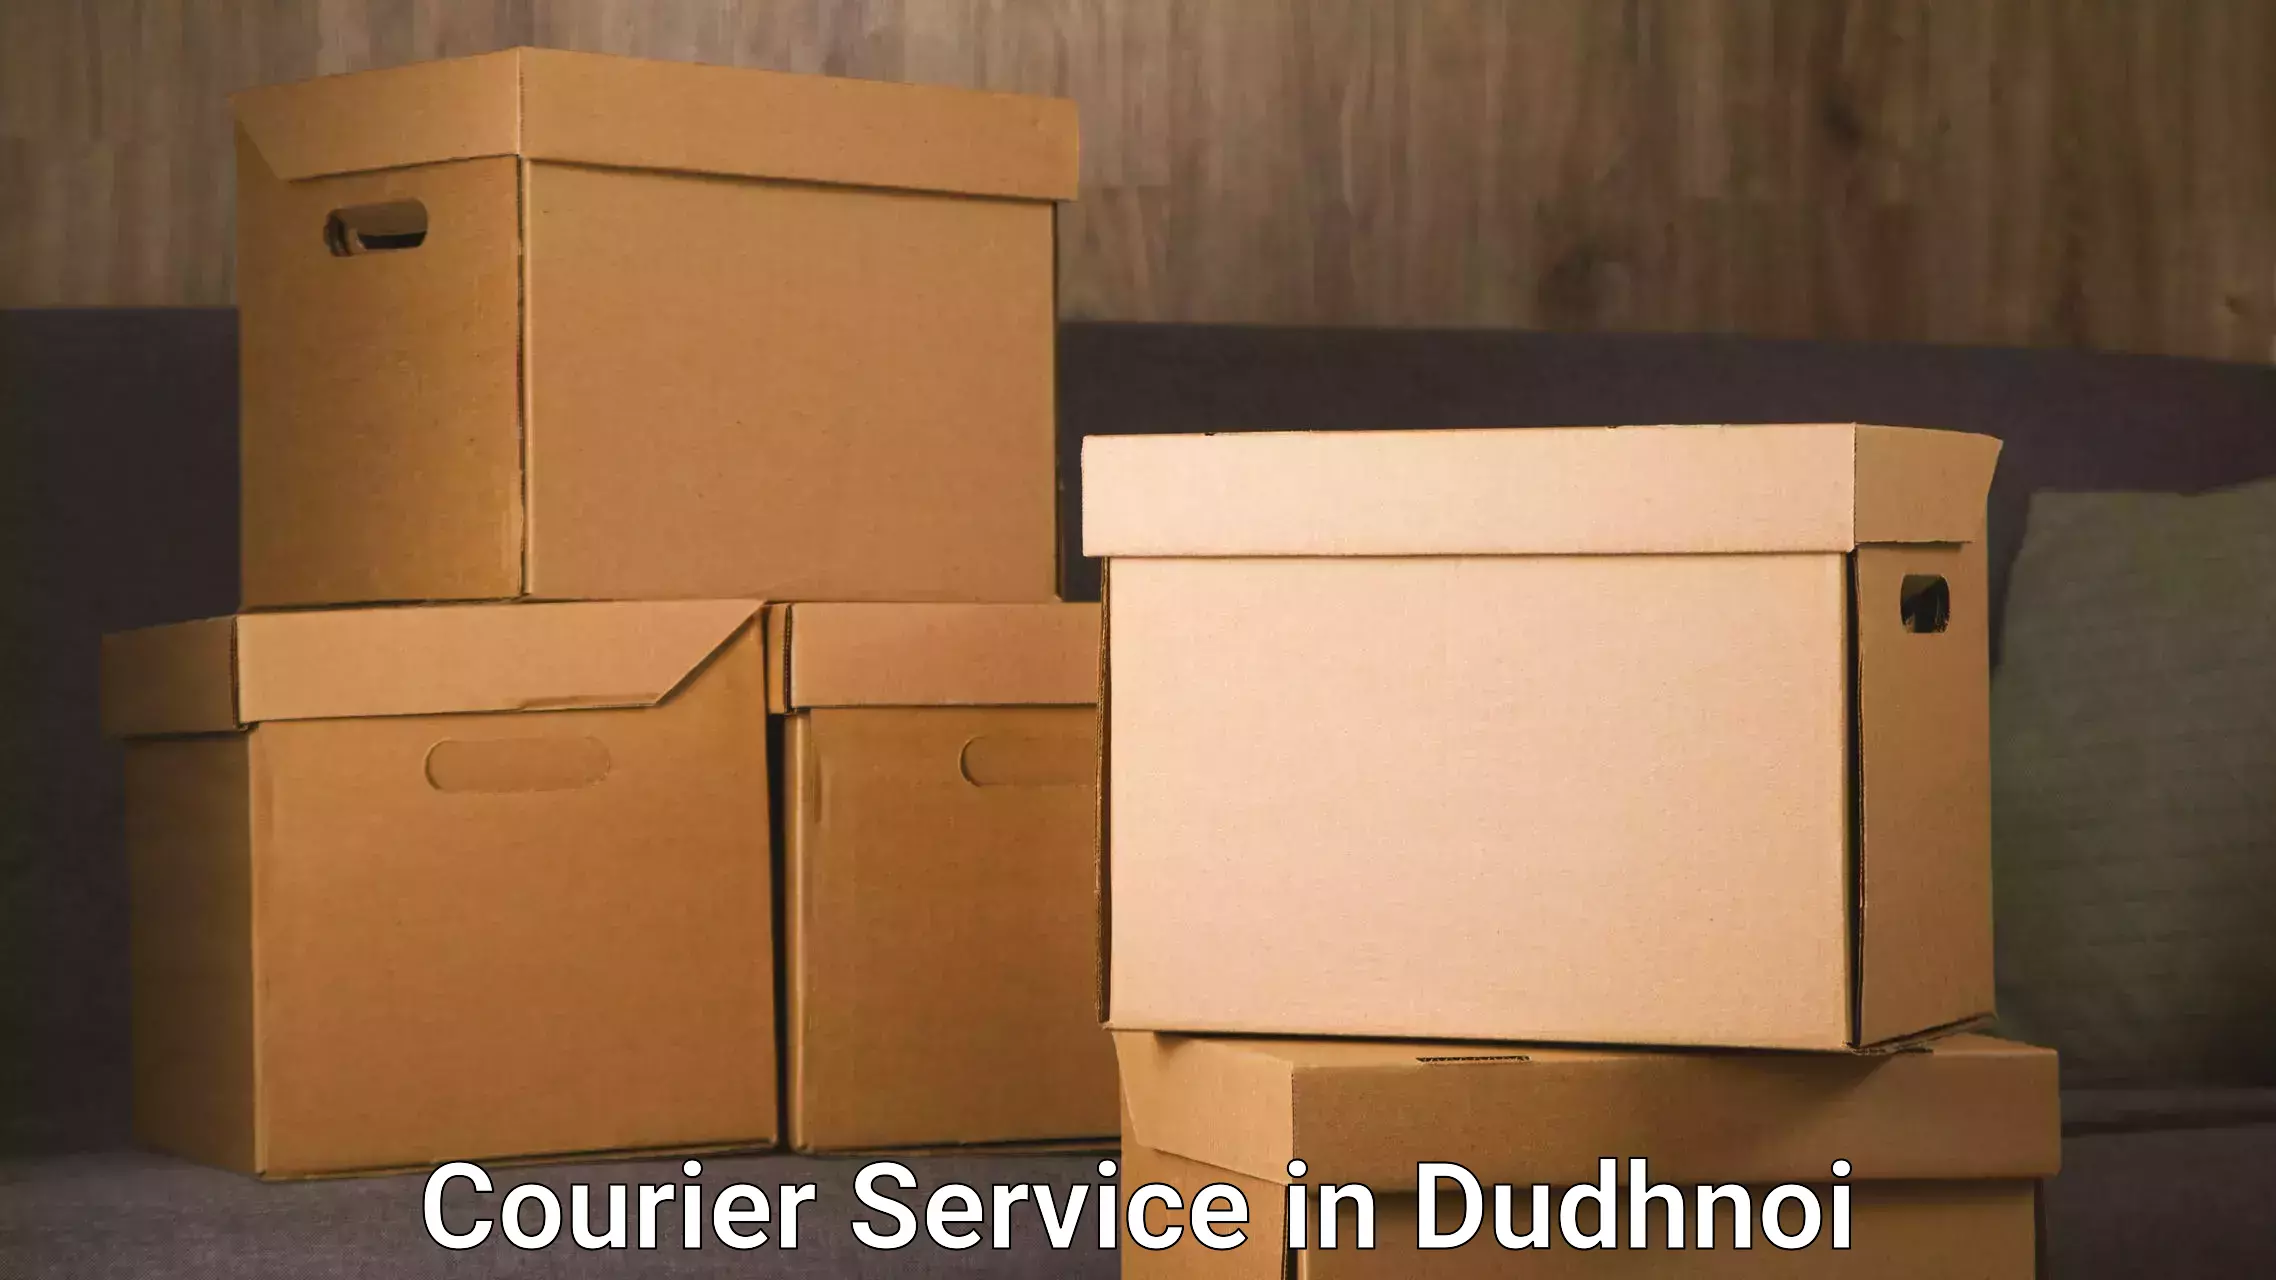 Customer-centric shipping in Dudhnoi